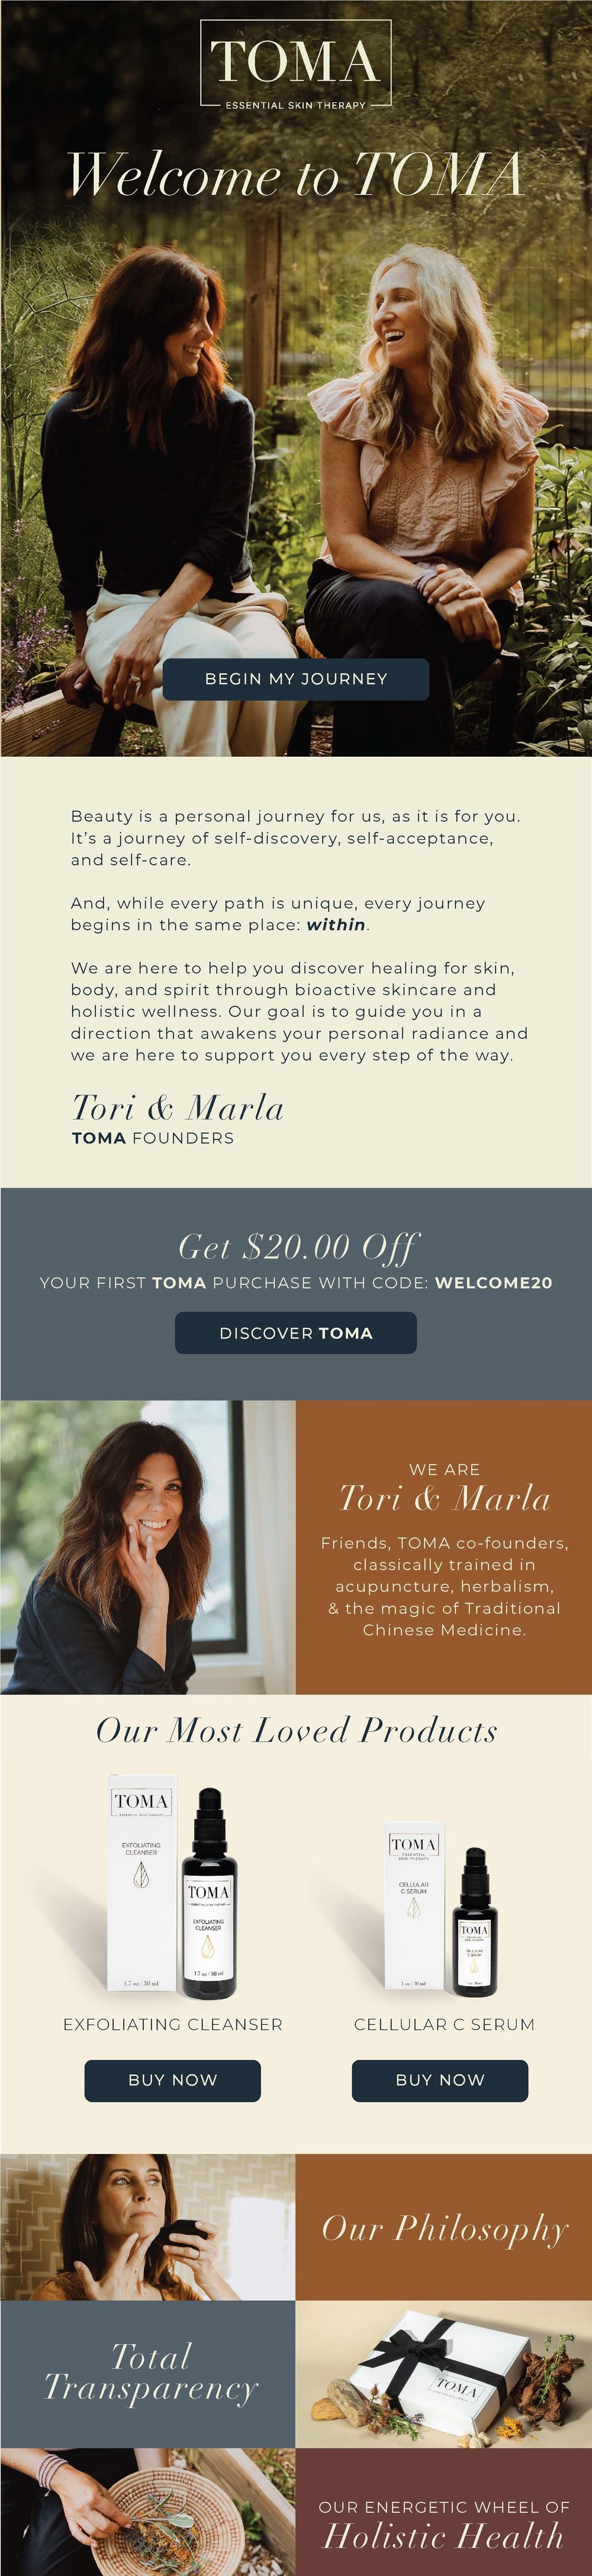 Toma Skin Therapies Email Designs September 2021 - Opt In Email 1.jpg